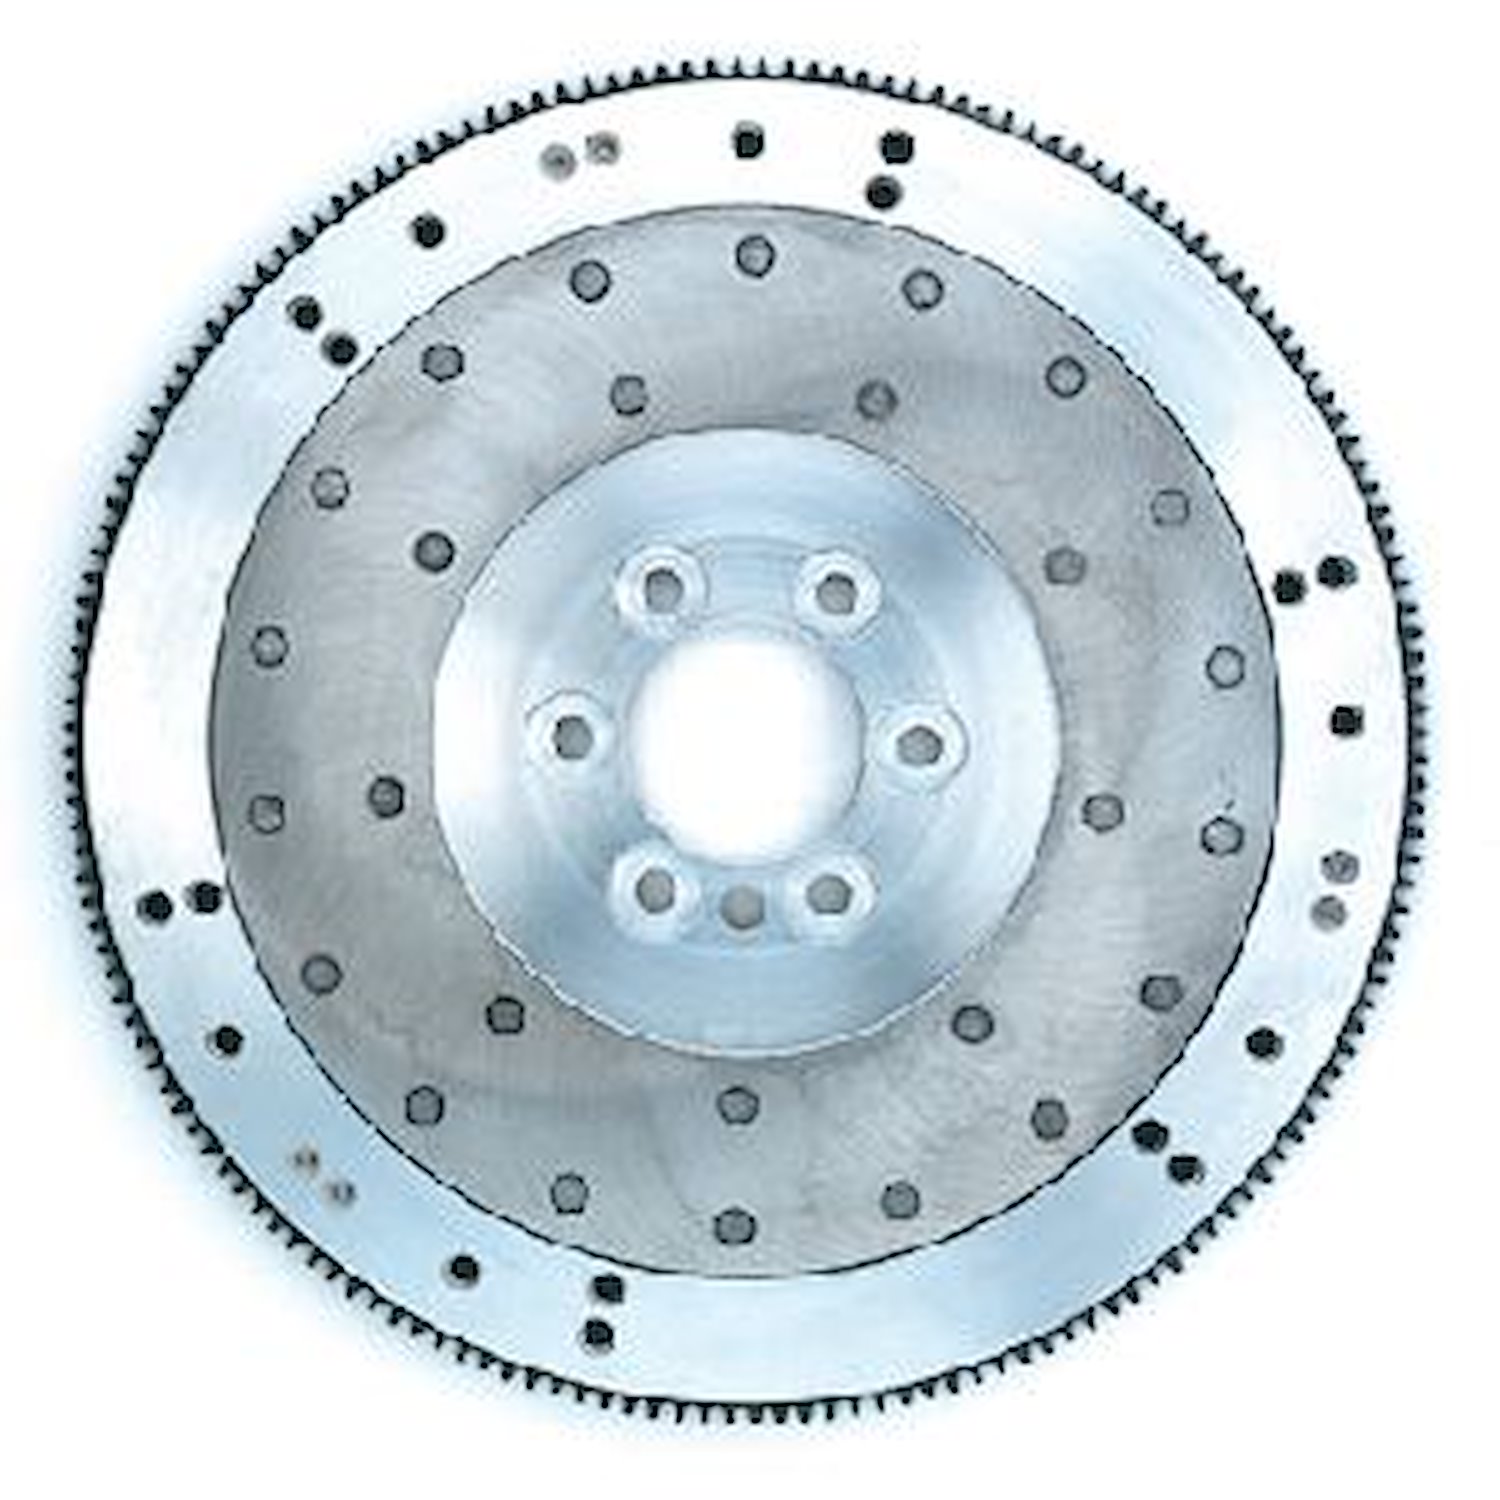 Billet Aluminum 168-Tooth Flywheel 1970-90 Chevy 454 with large bellhousing